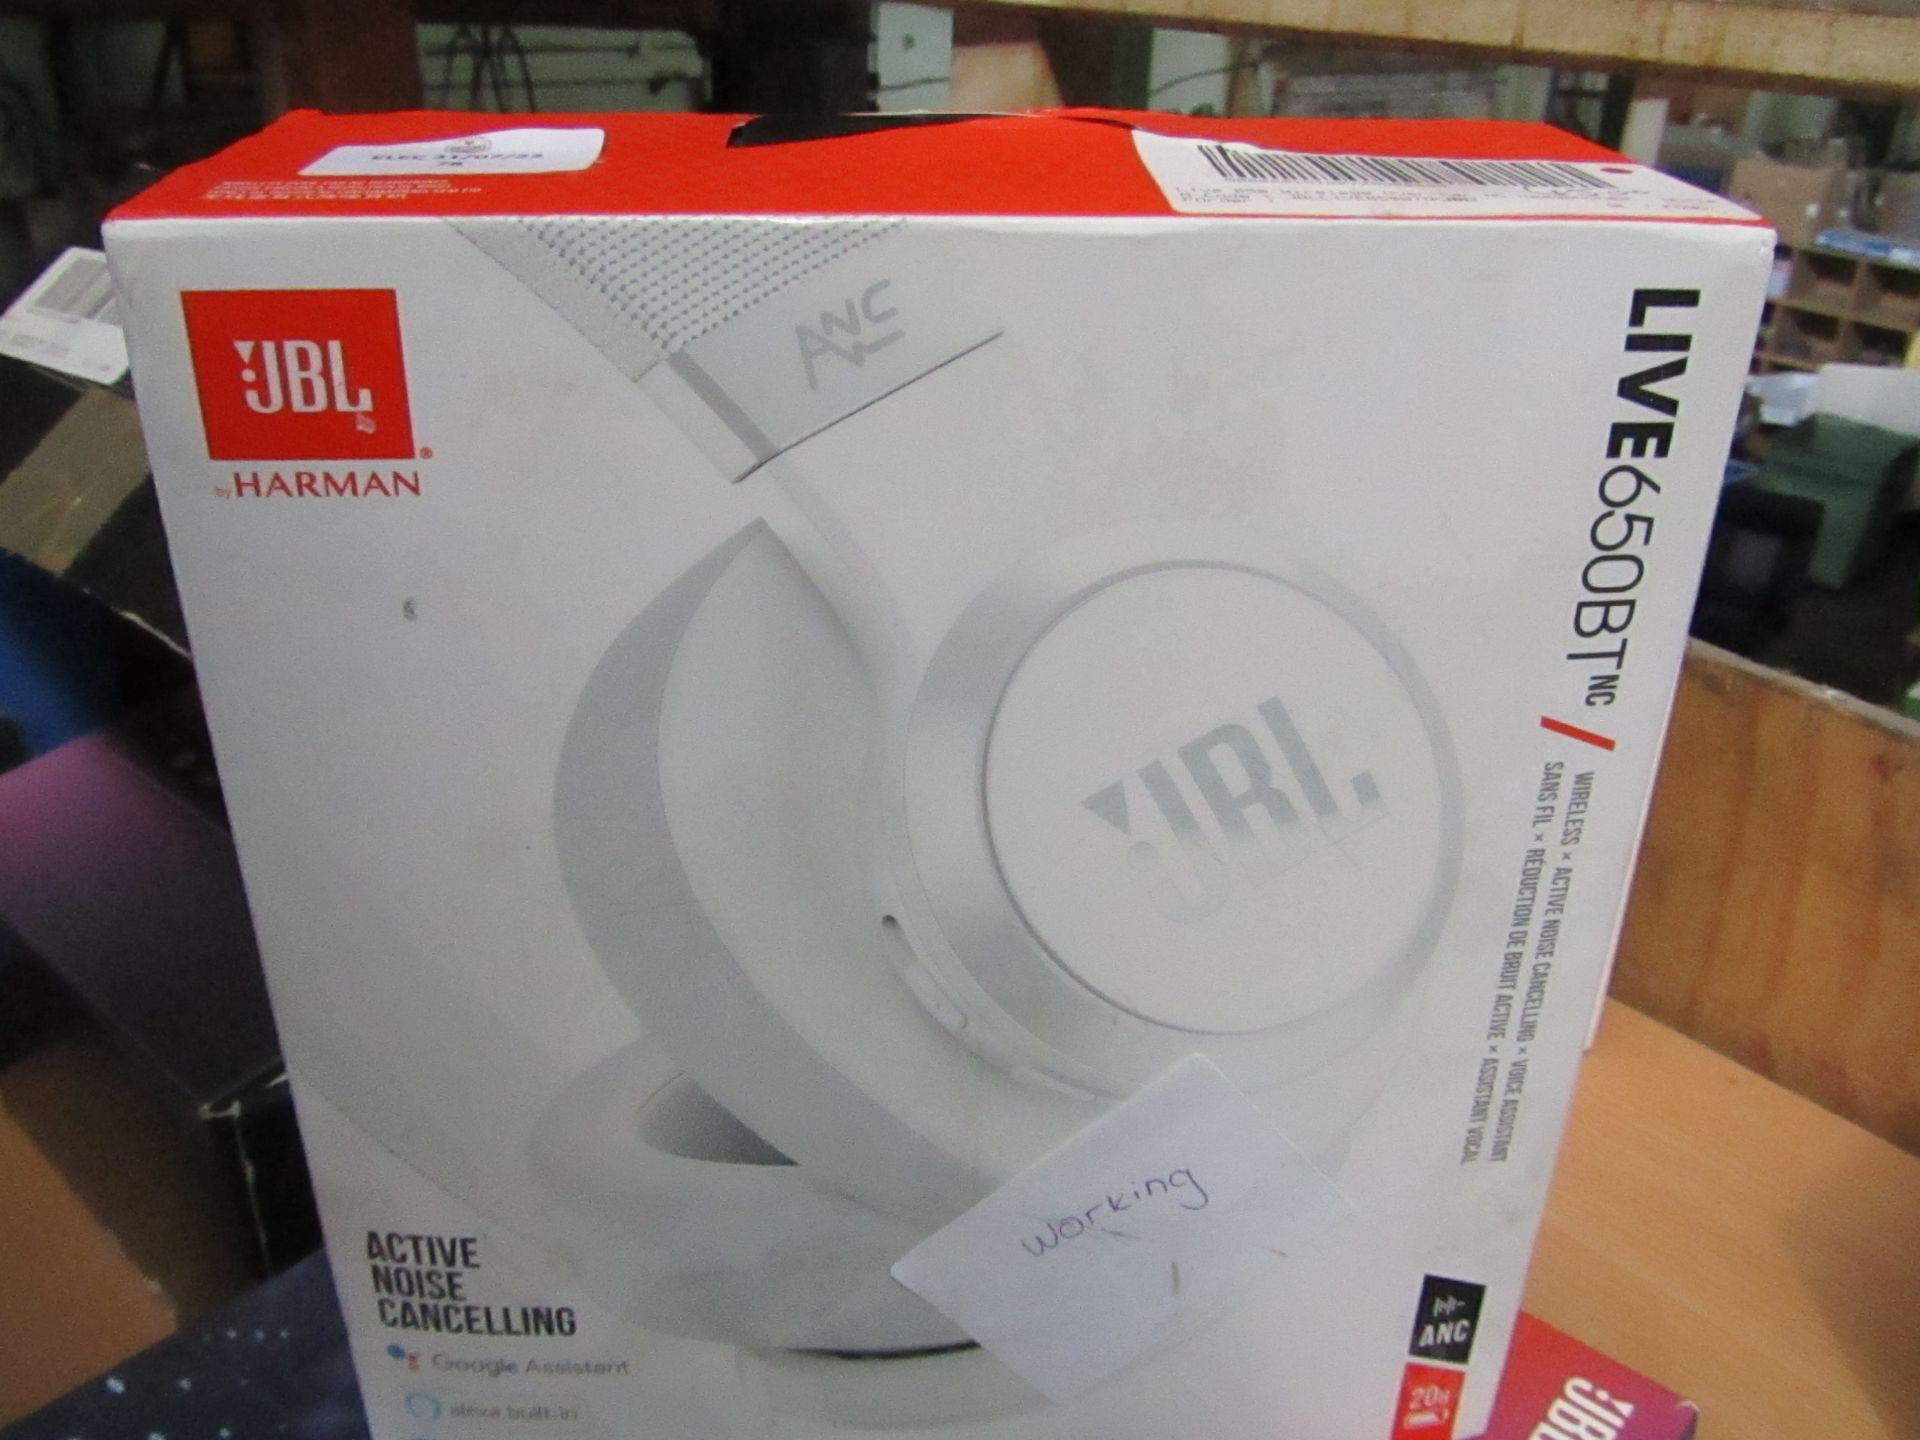 1x JBL Live 650BTnc Wireless Over Ear Headphones - White, tested working for sound, no other